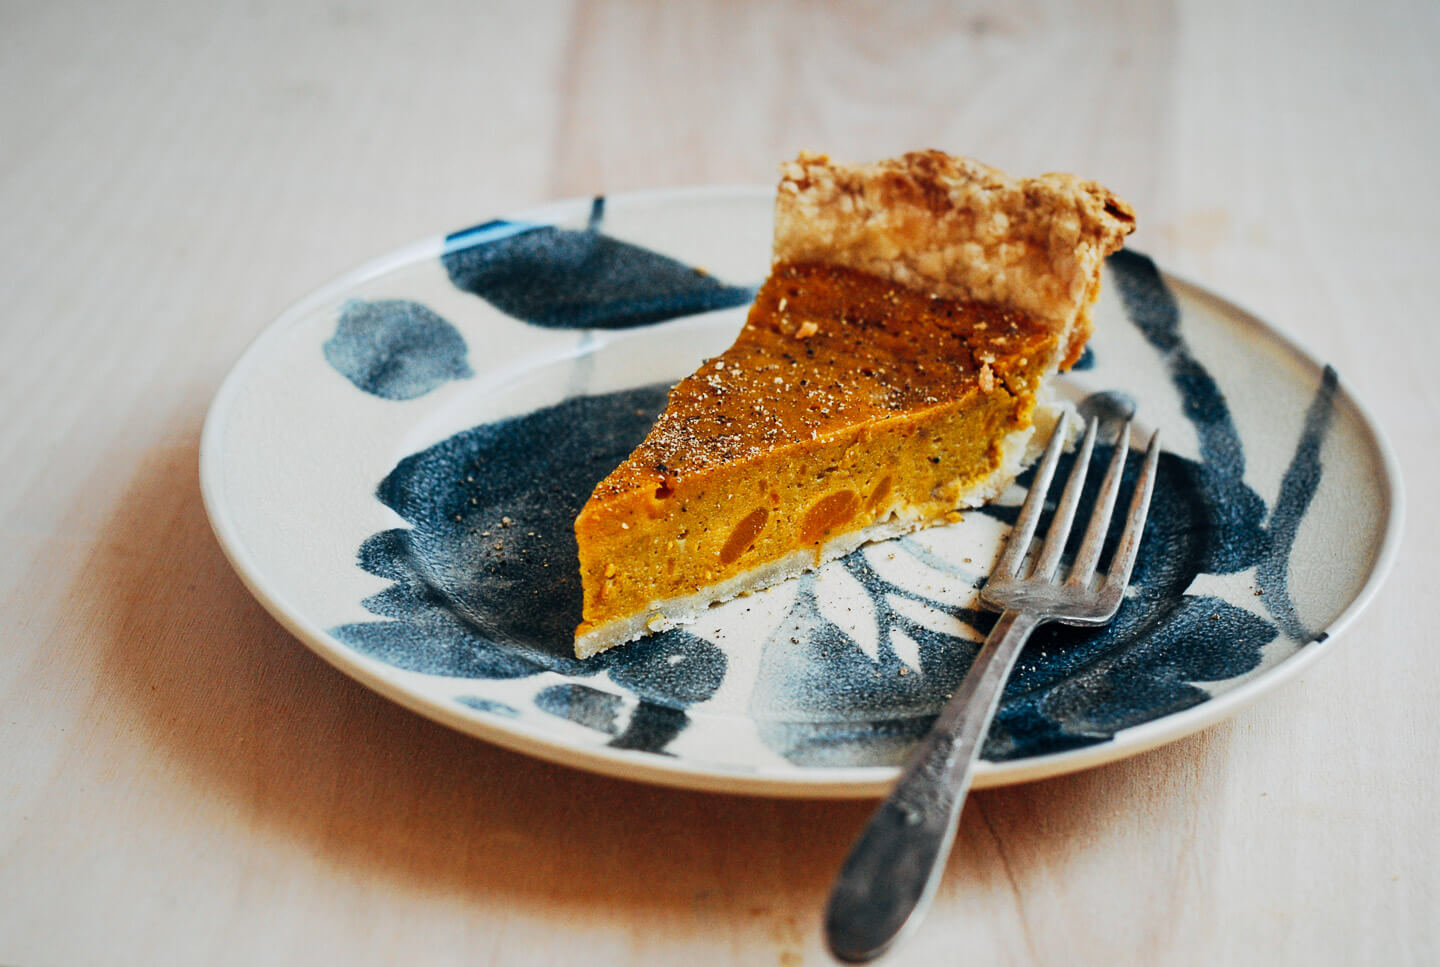 A creative twist on a classic pumpkin pie recipe, this kabocha squash pie is flecked with chipotle chili powder, black pepper, and fresh ginger.